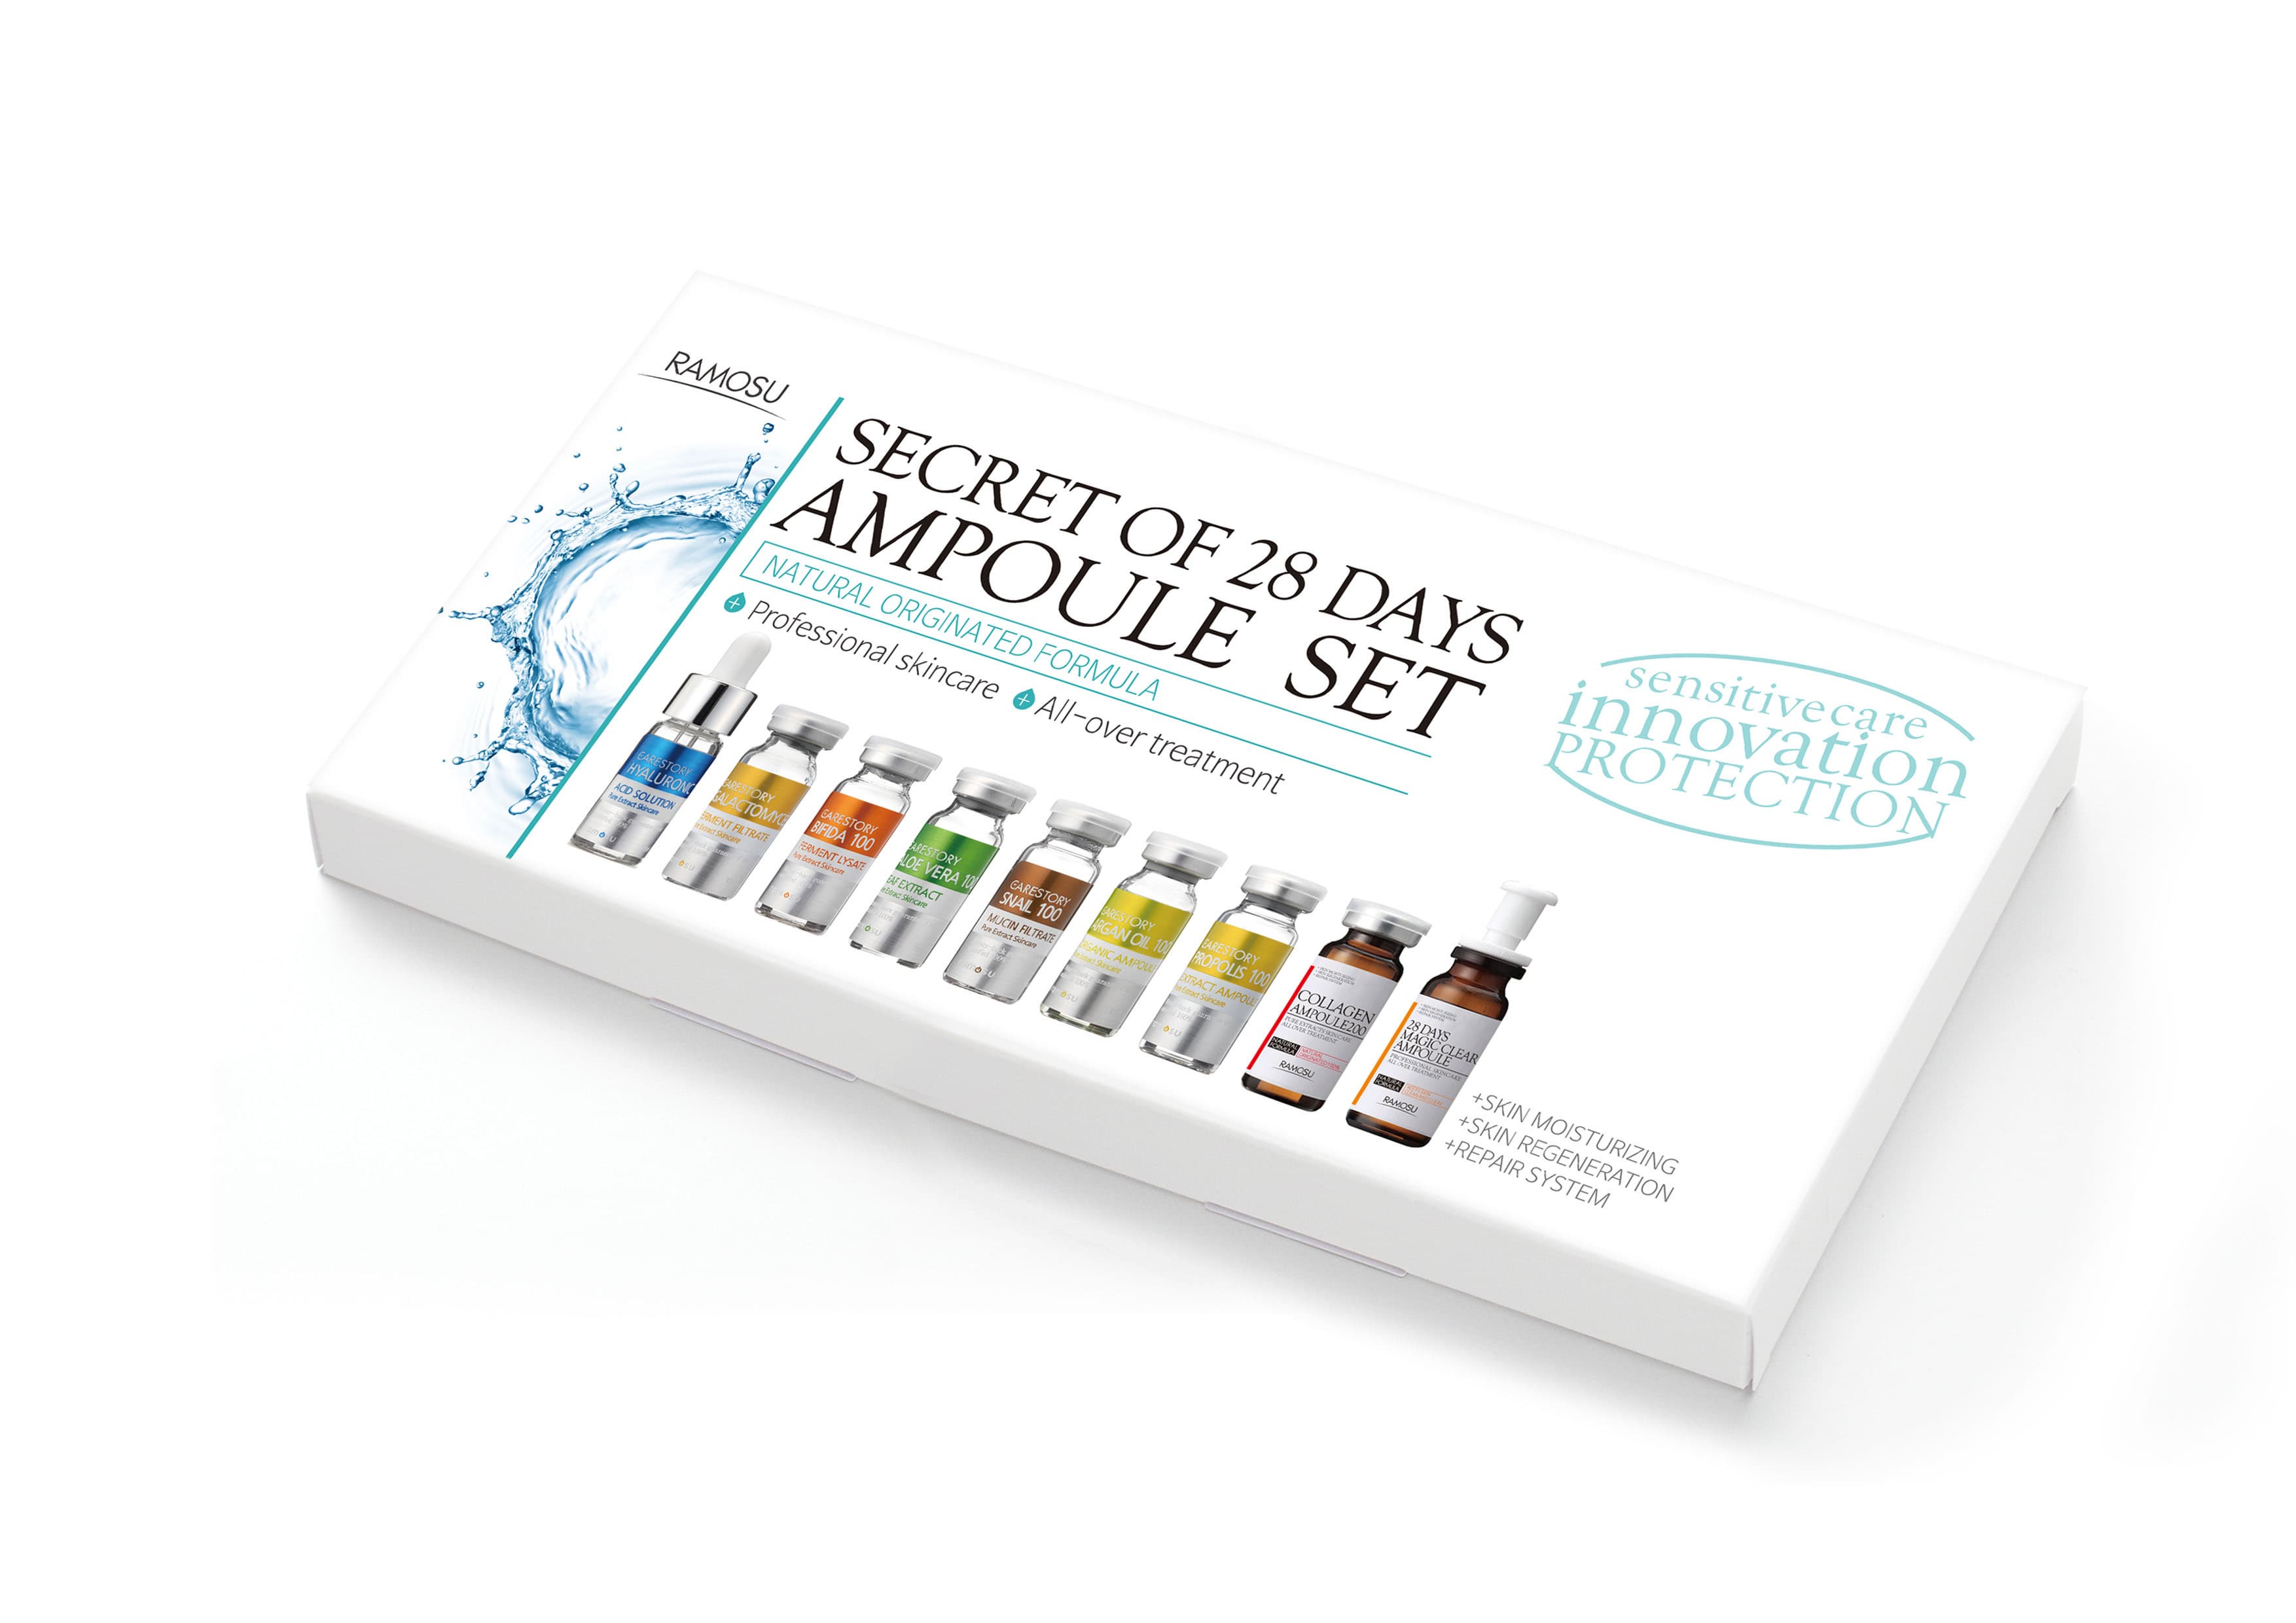 Ramosu Secret of 28 Days 9 Ampoules in set